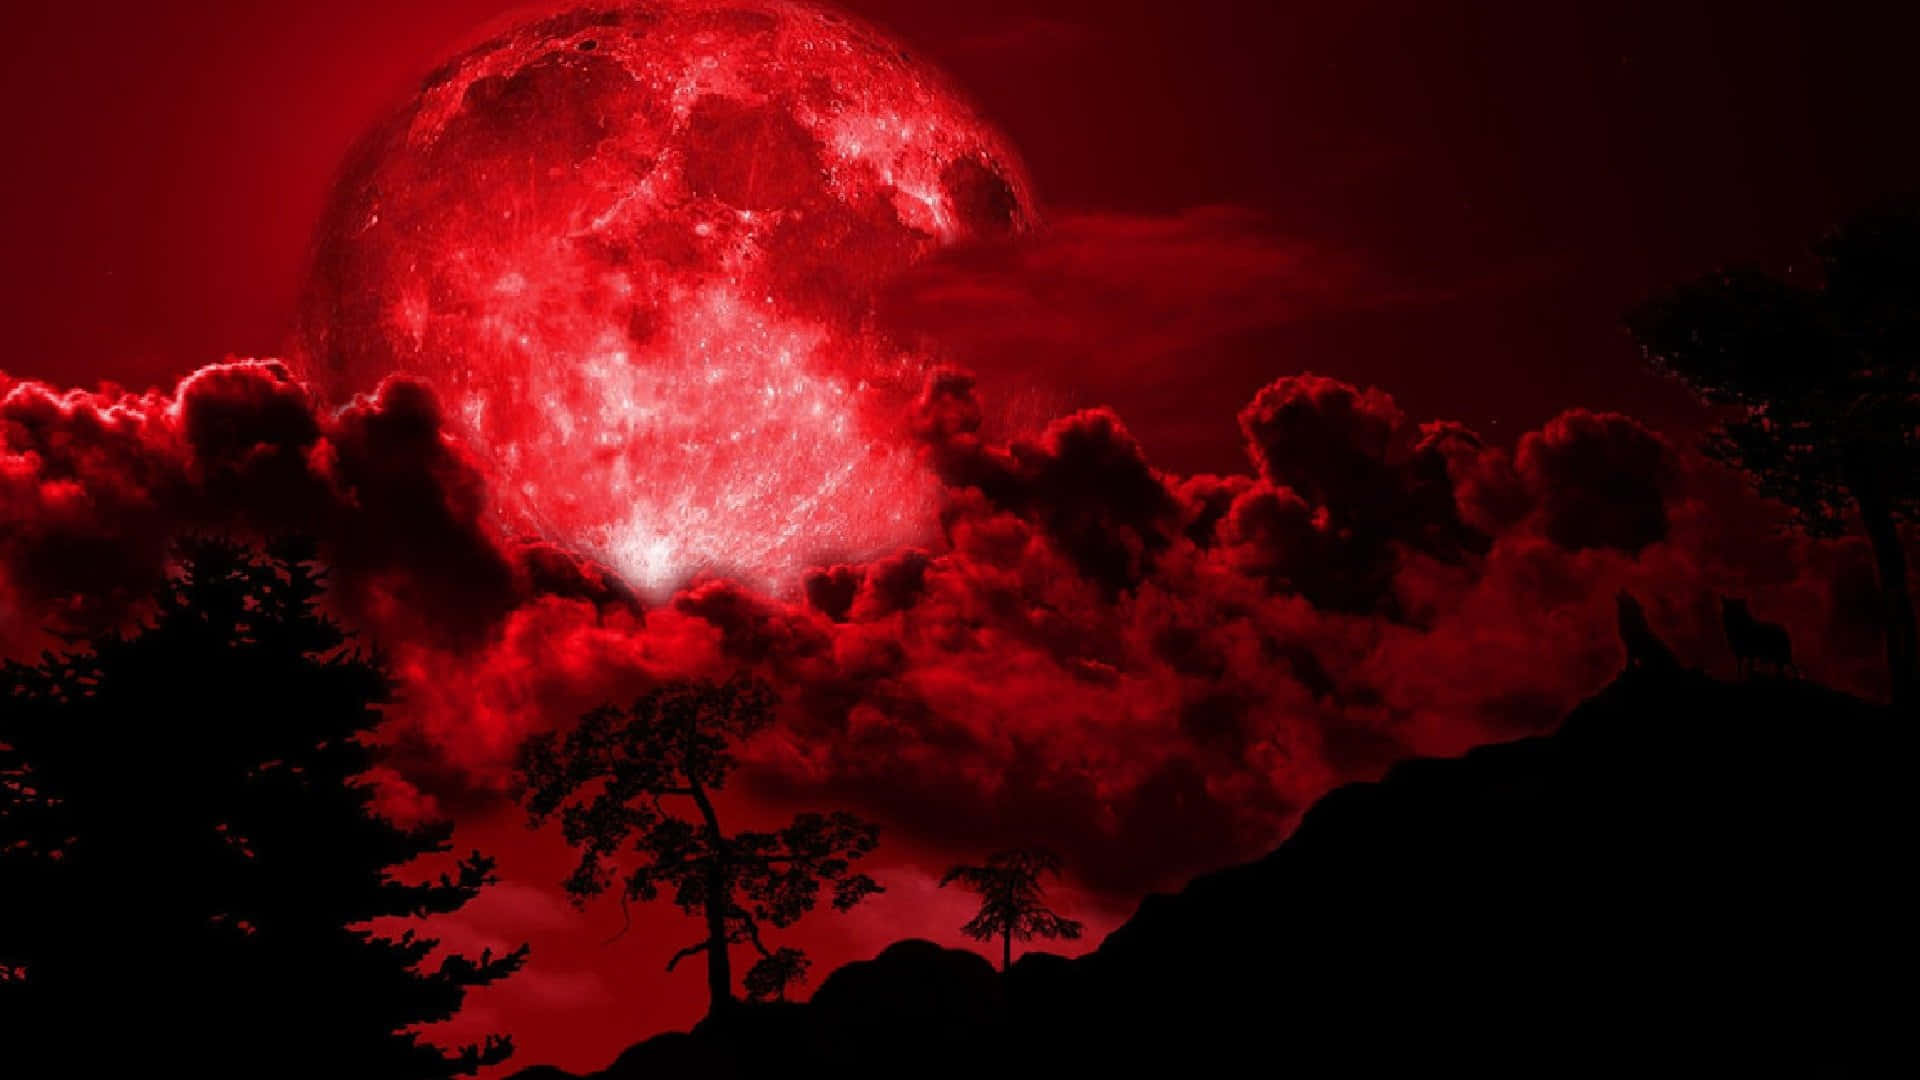 Red full moon wallpaper 2560x1440 download to your desktop - Red, dark red